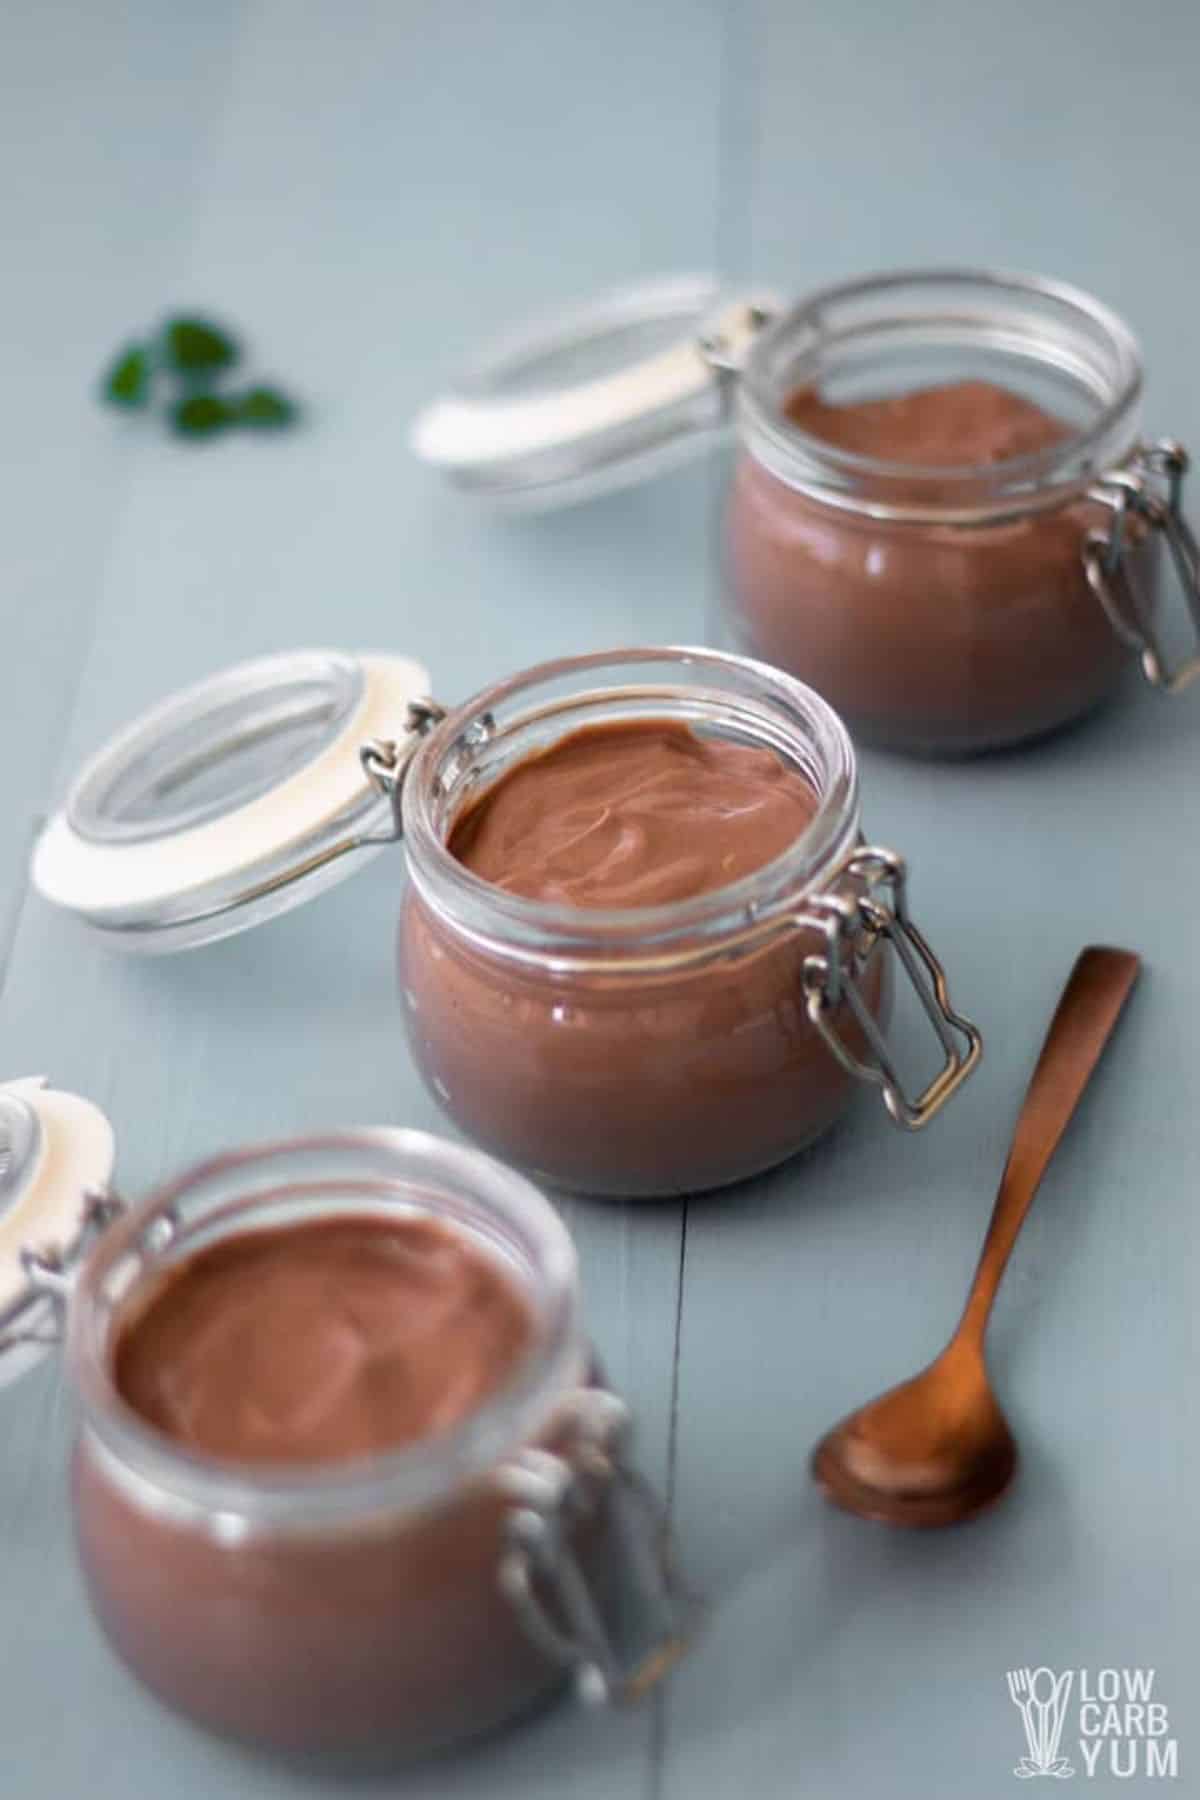 Creamy quick and easy chocolate tofu pudding dessert in glass jars.